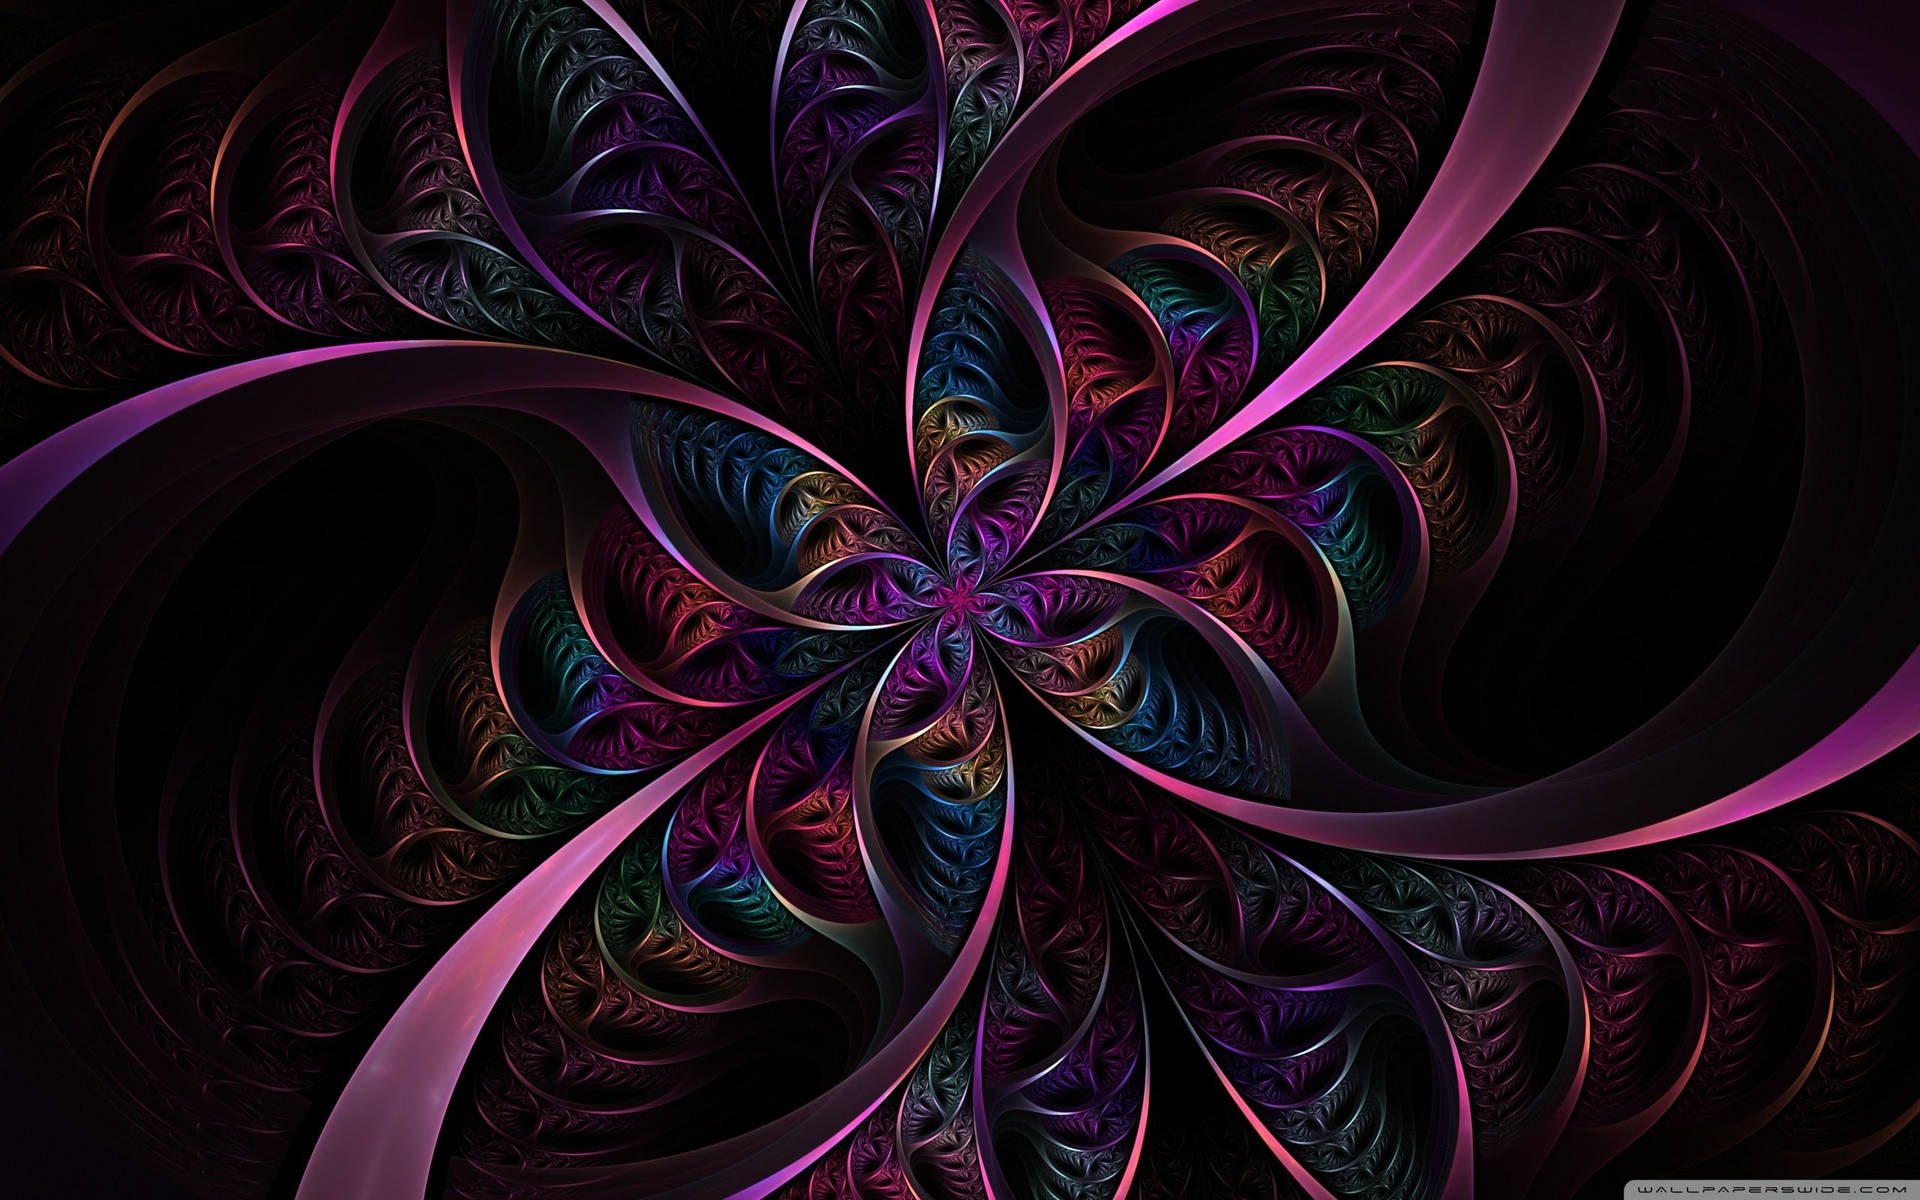 Exploring the psychedelic world Wallpaper